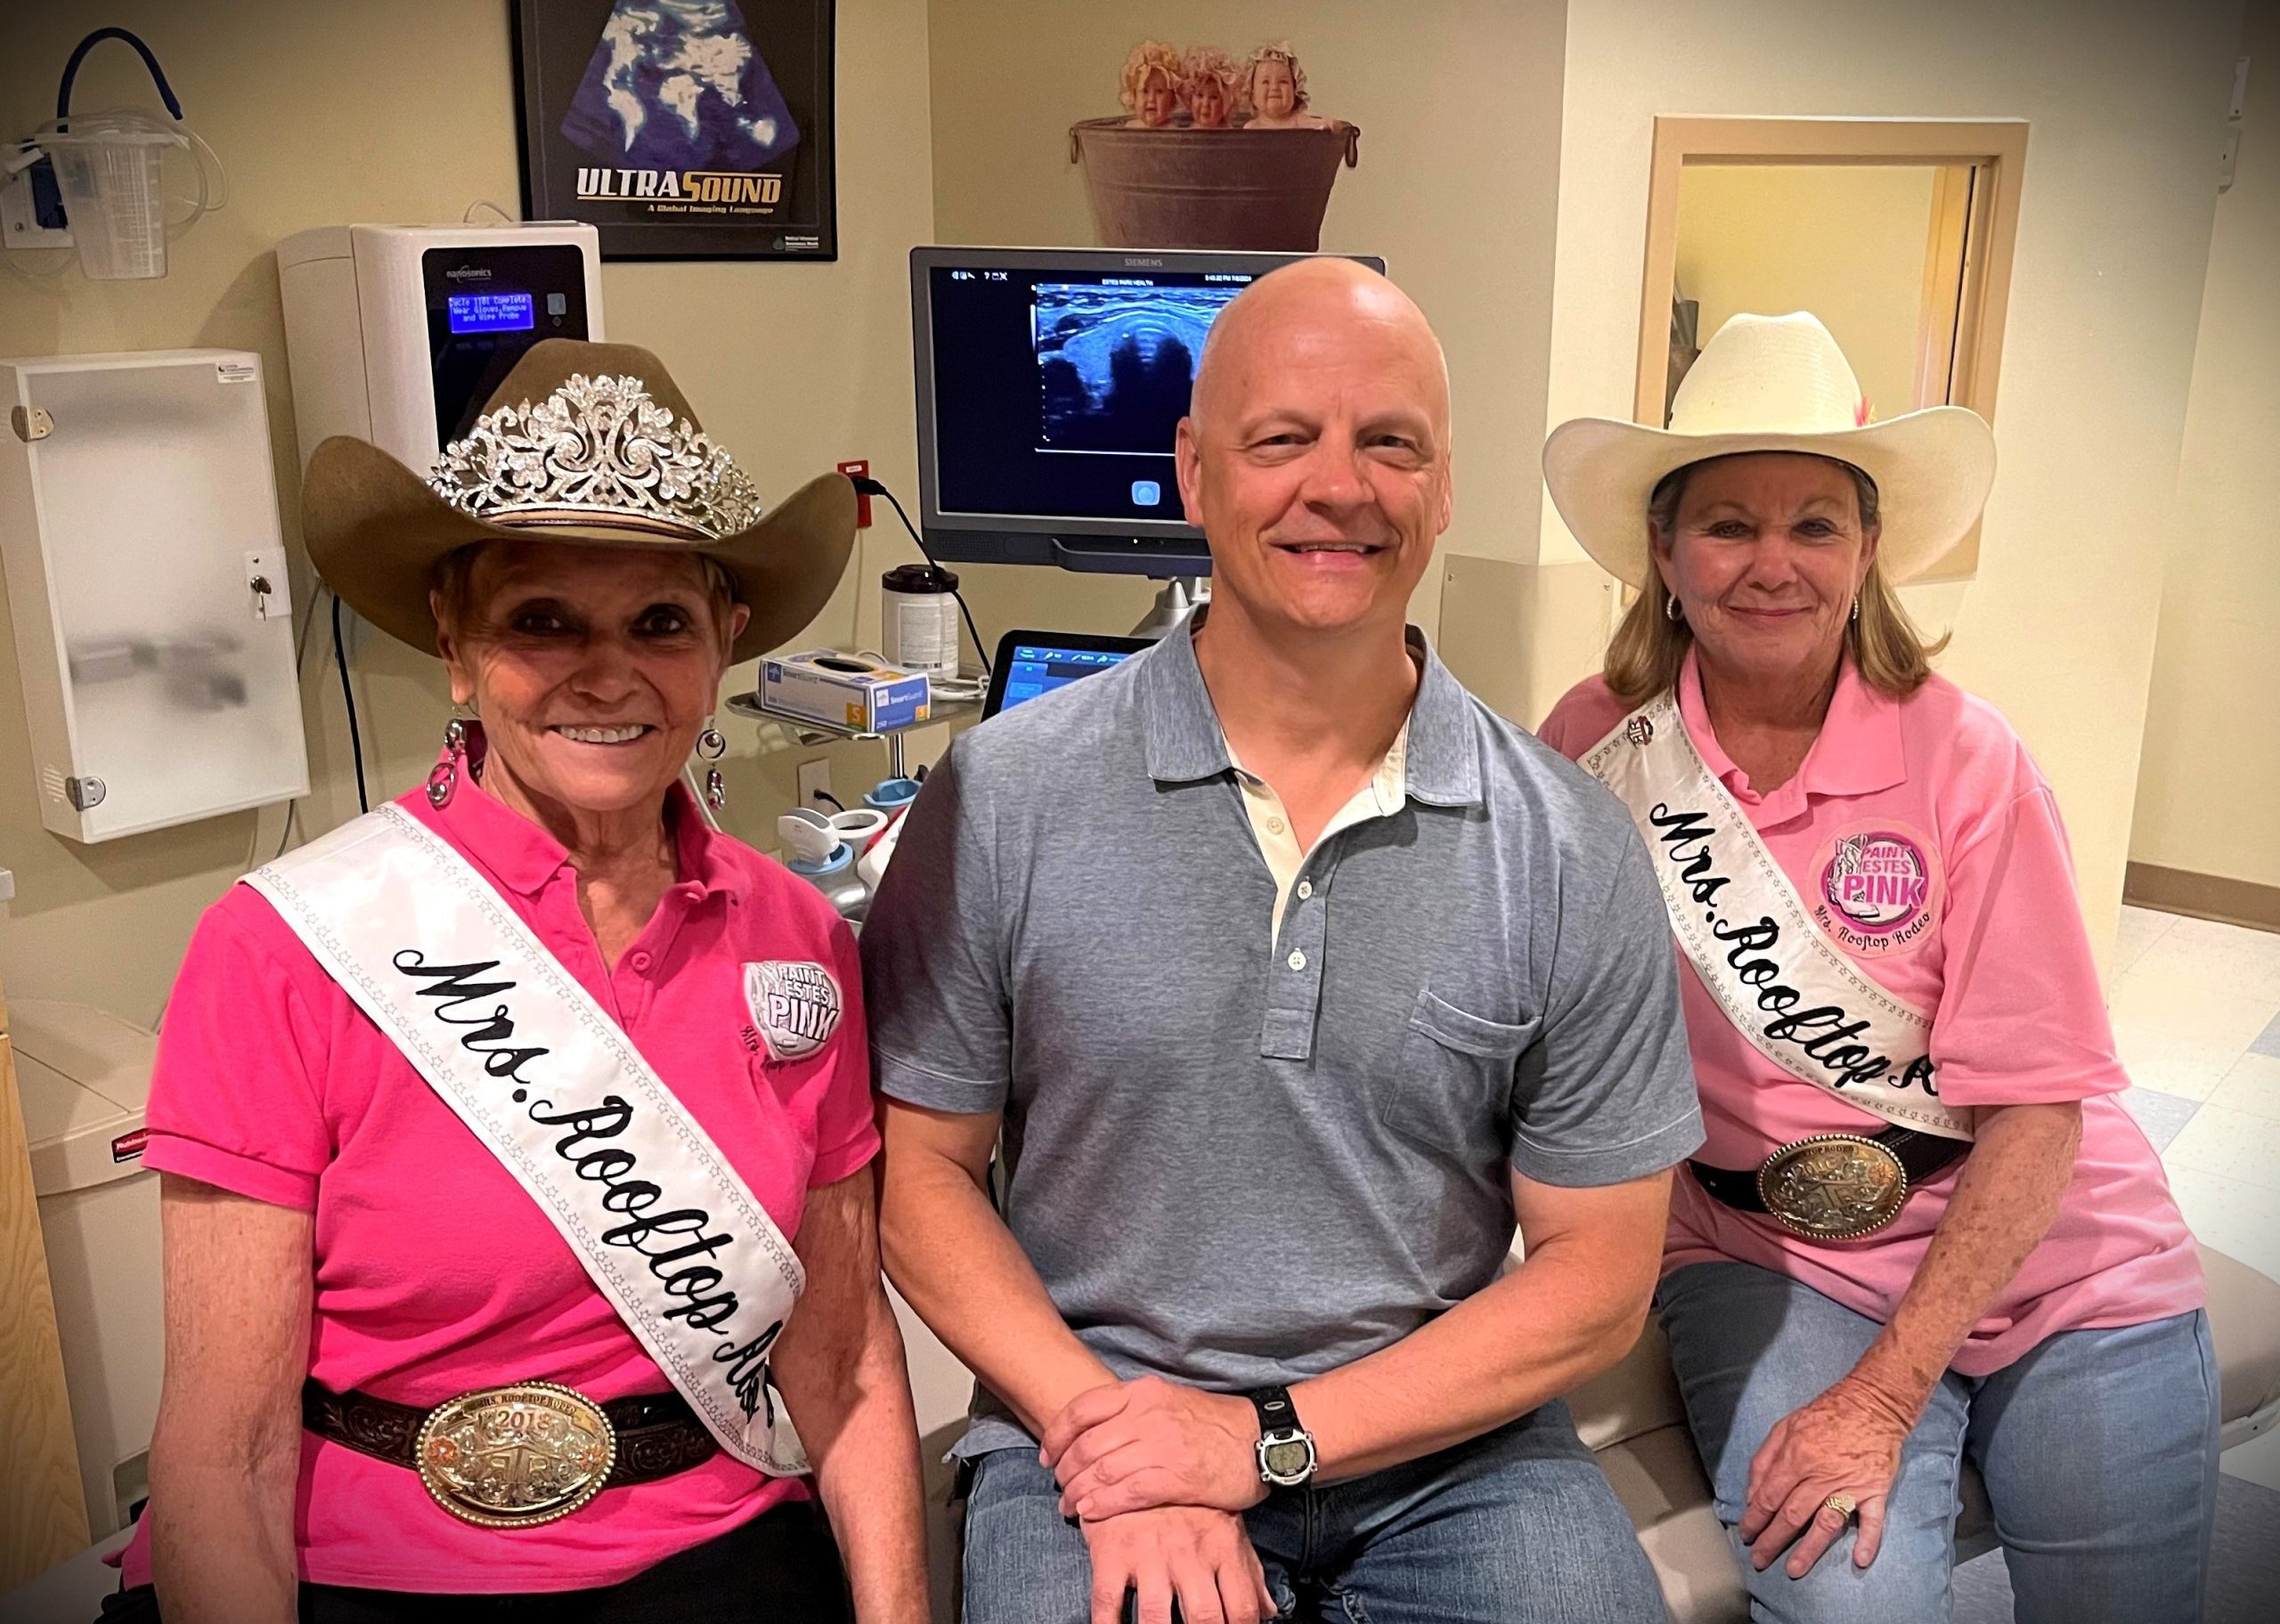 Two women wearing white cowboy hats and pink shirts with 